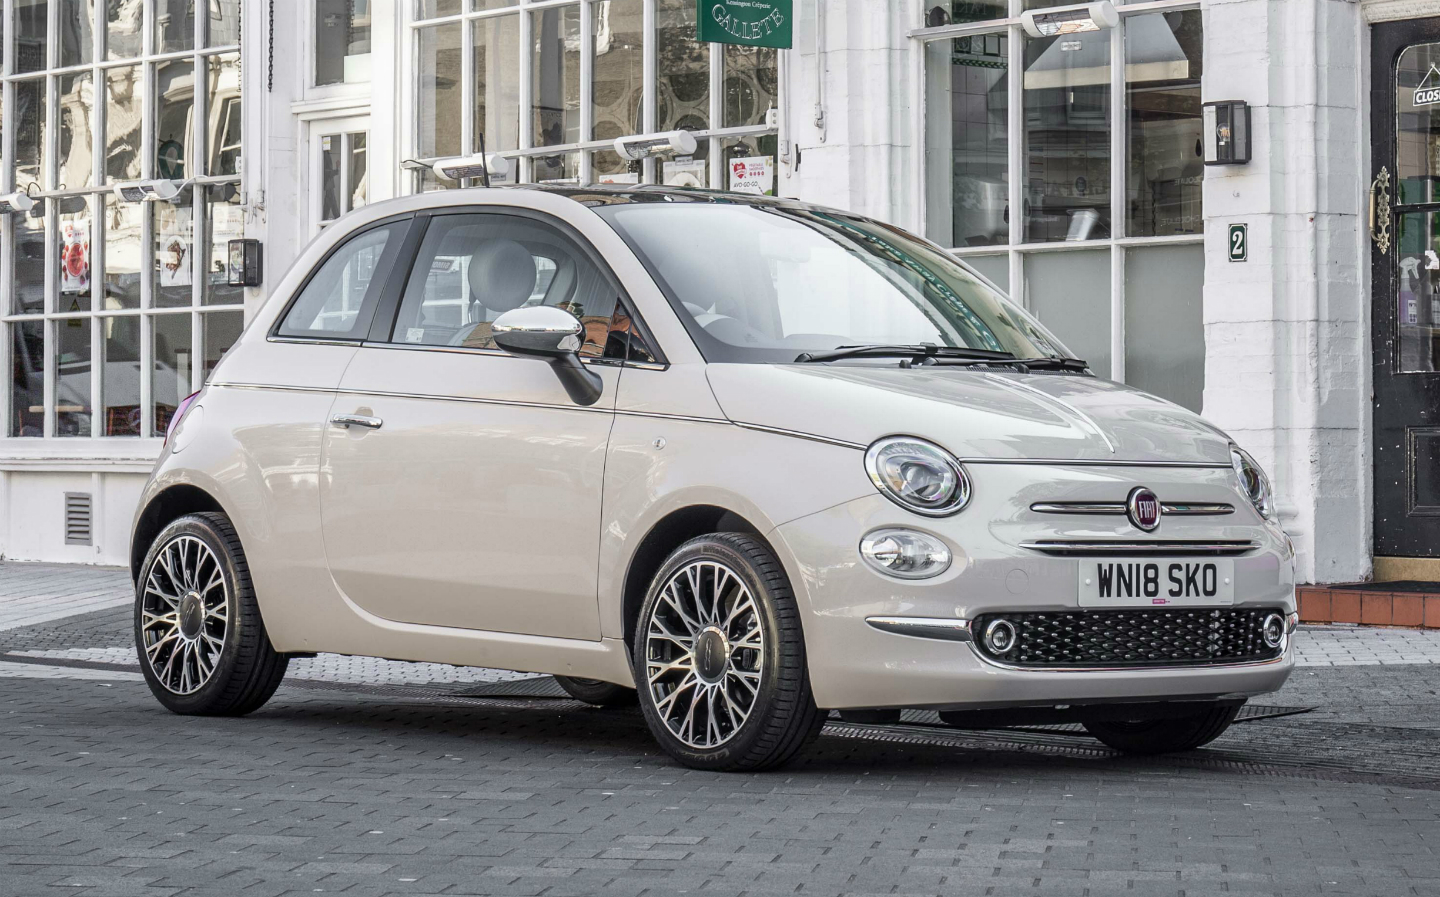 Sunday Times Motor Awards 2019: Best Citycar and Small Car of the Year. Fiat 500